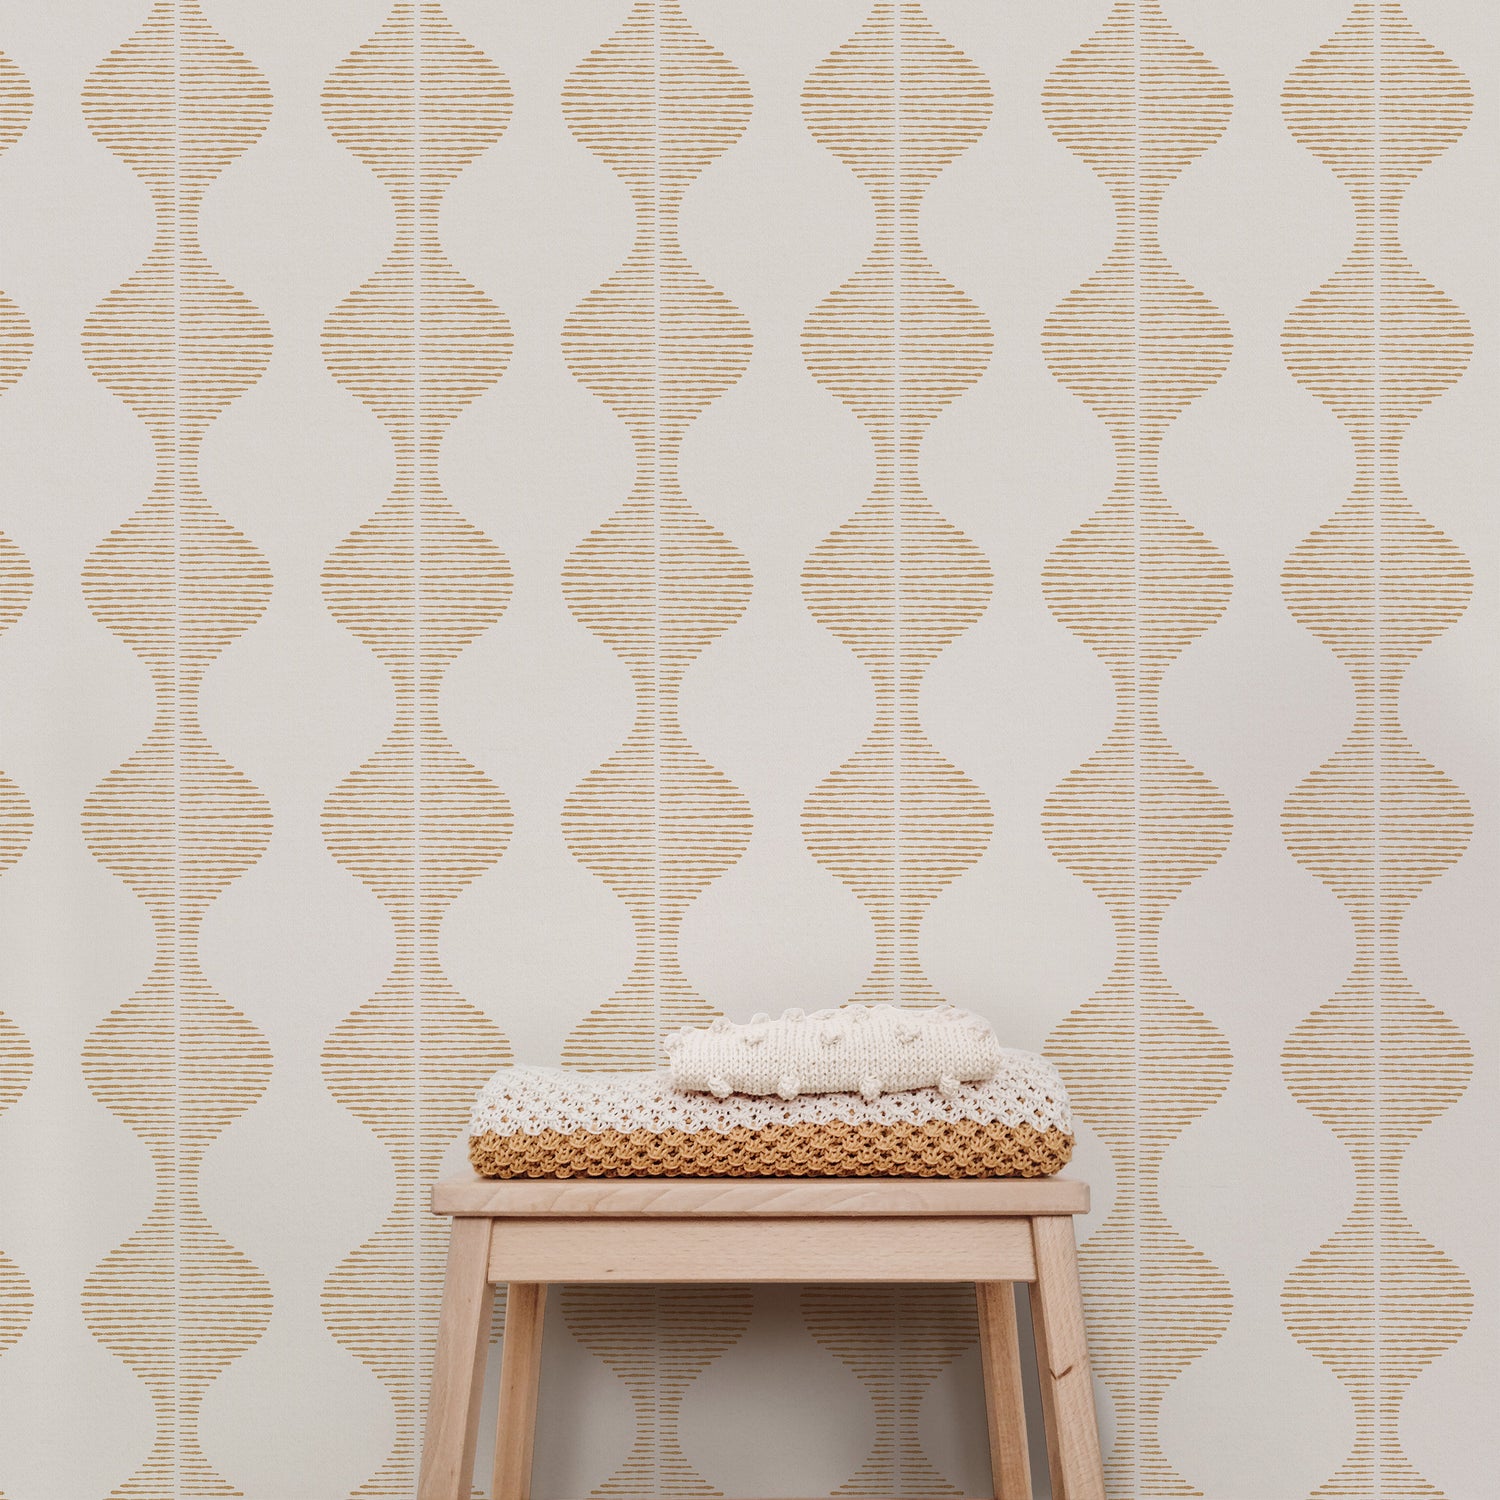 Bring a wave of modern beauty to any room with this stunning Wavy Line Art Wallpaper! The subtle tawny on cream design is completely gorgeous and sure to make a statement in any space.